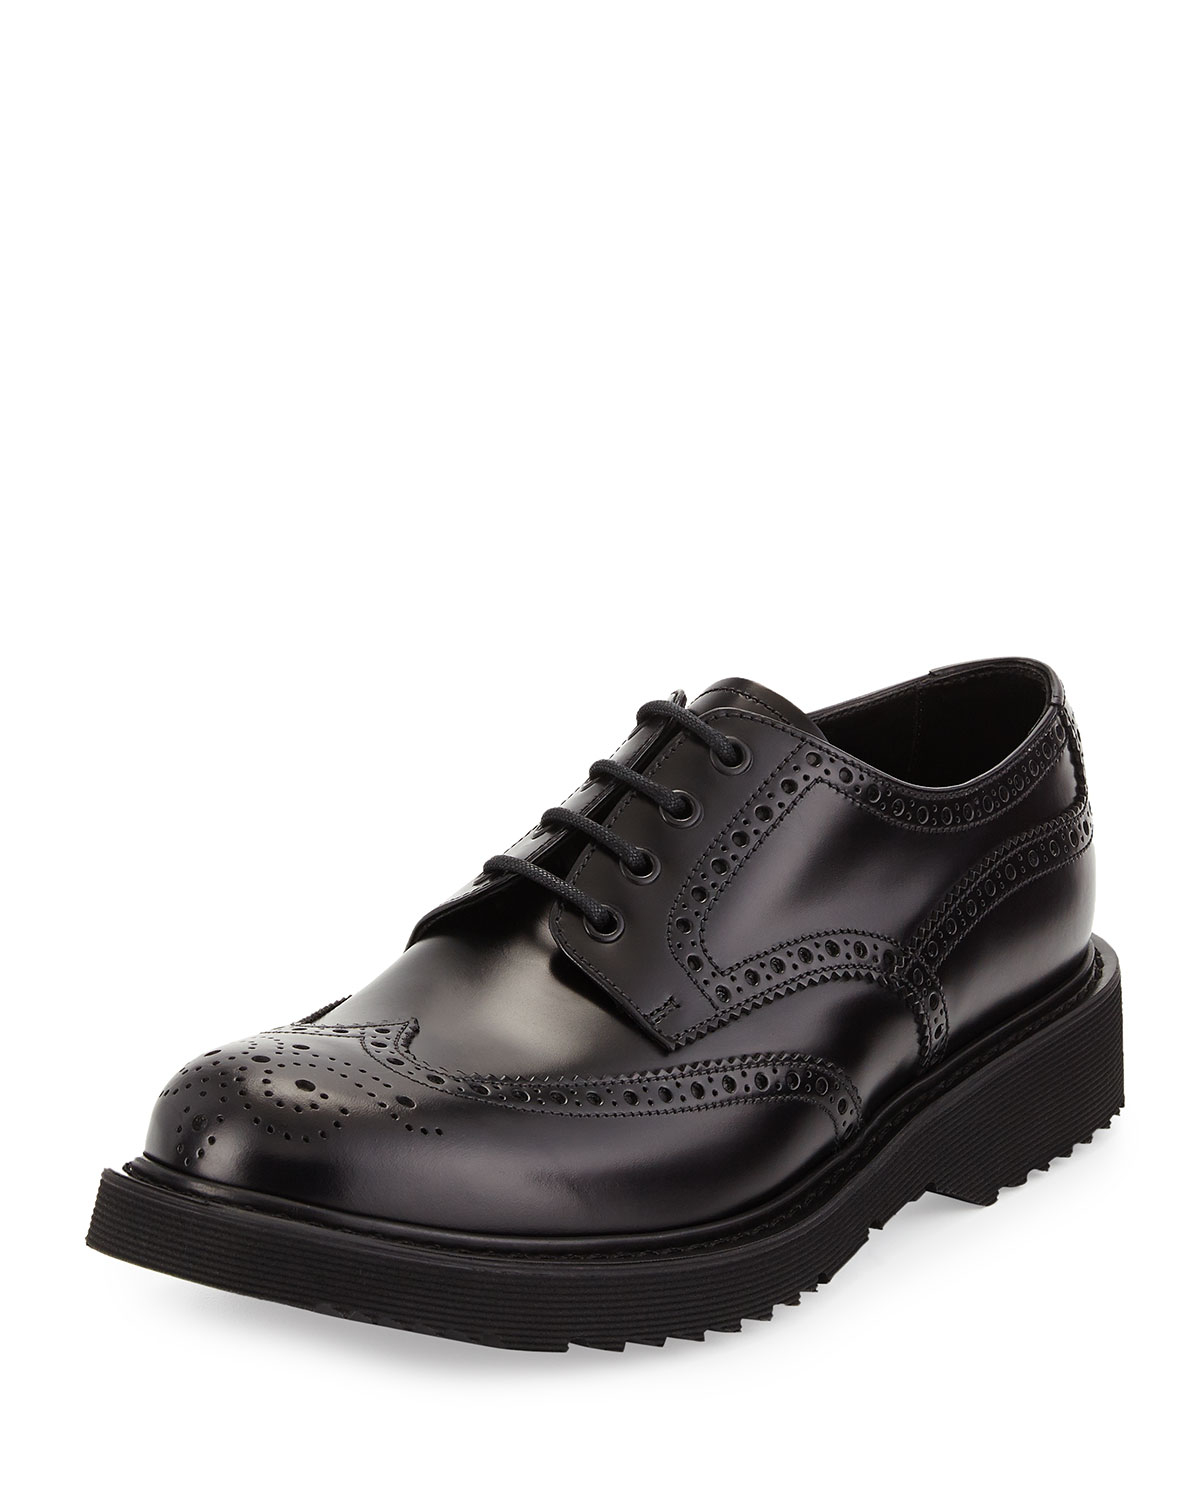 Prada Rubber-Sole Wing-Tip Derby Shoes in Black | Lyst